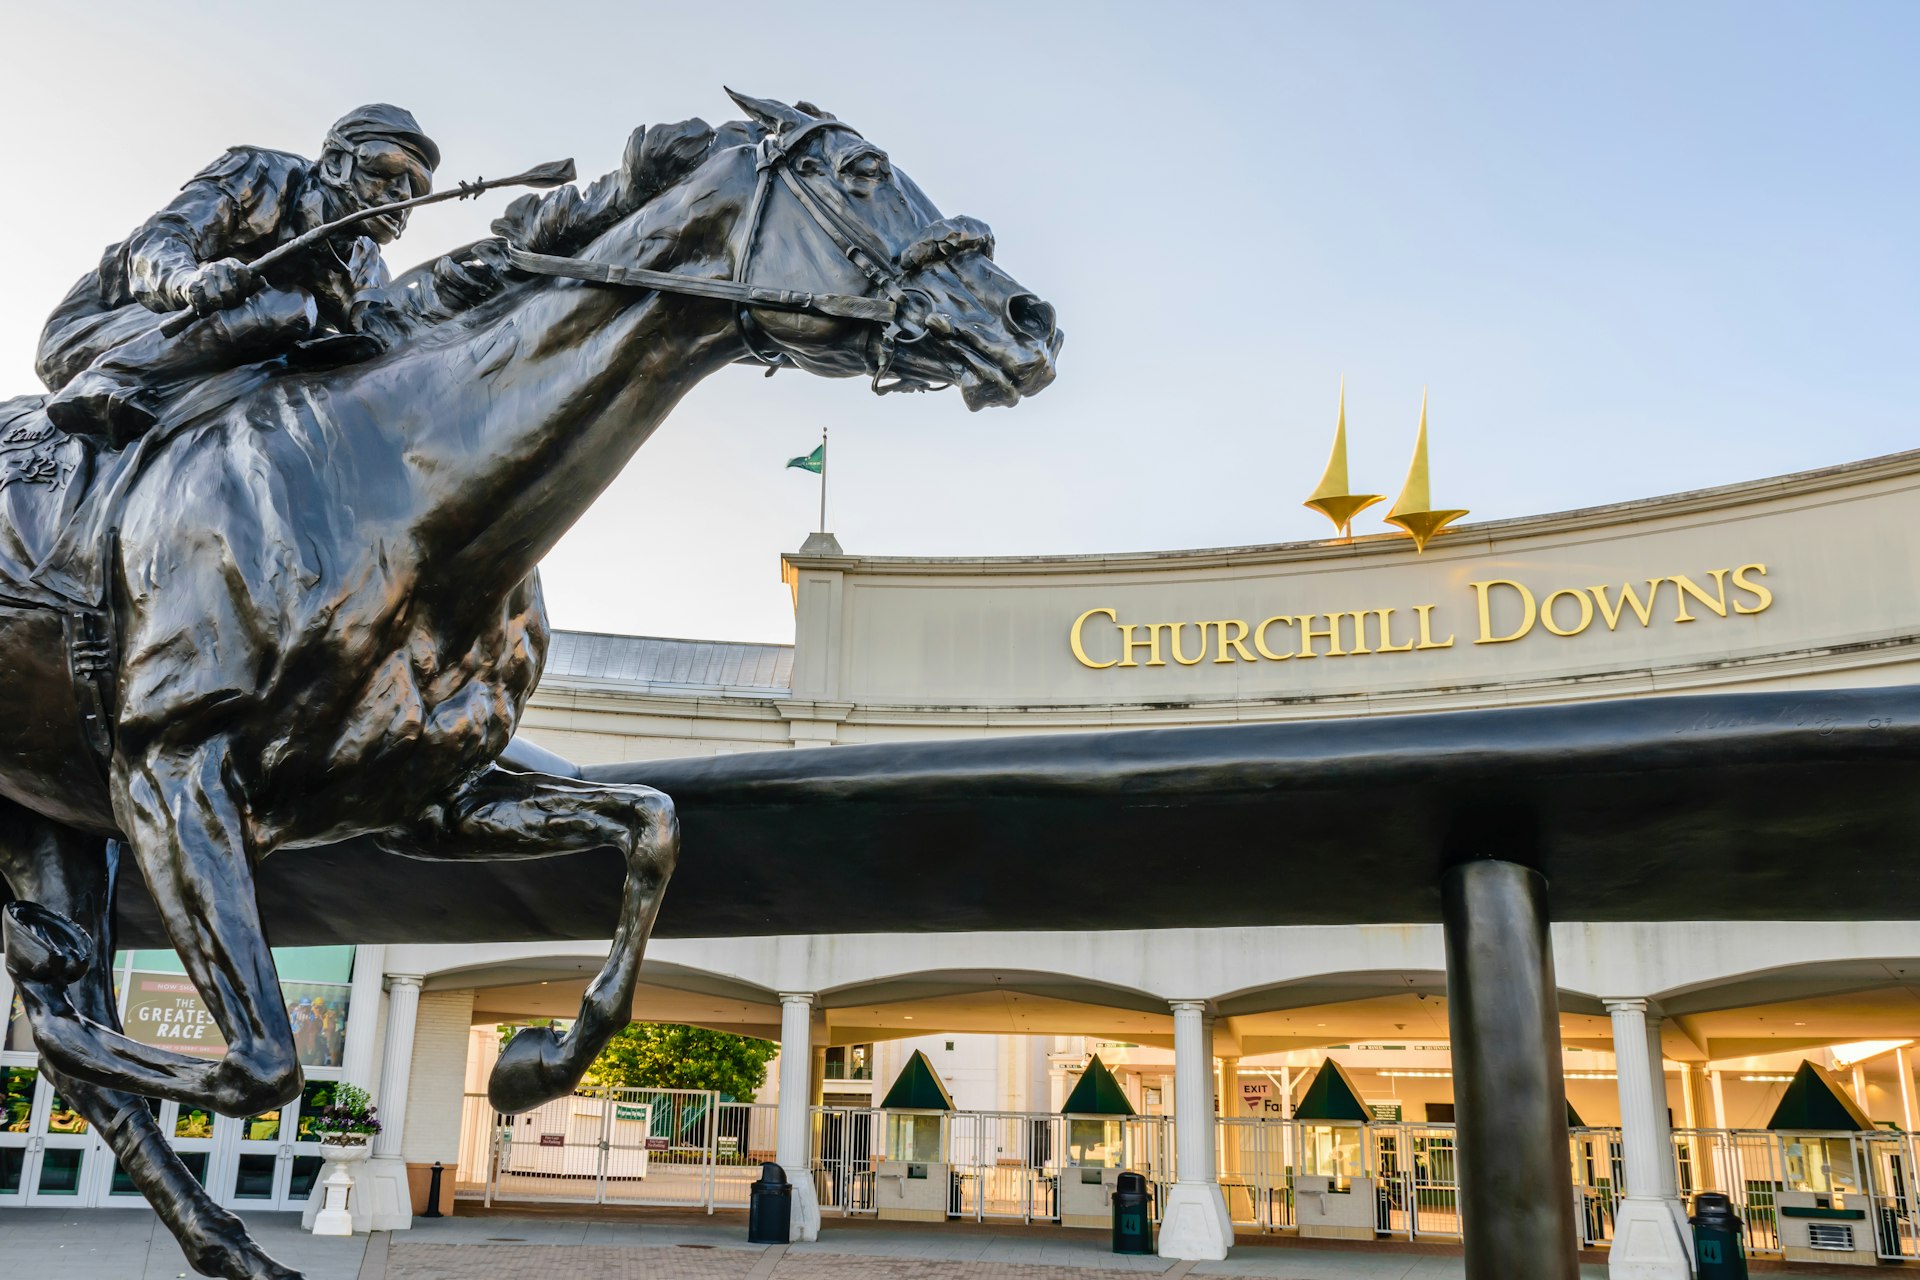 Entrance to Churchill Downs featuring a statue of Kentucky Derby Champion Barbaro